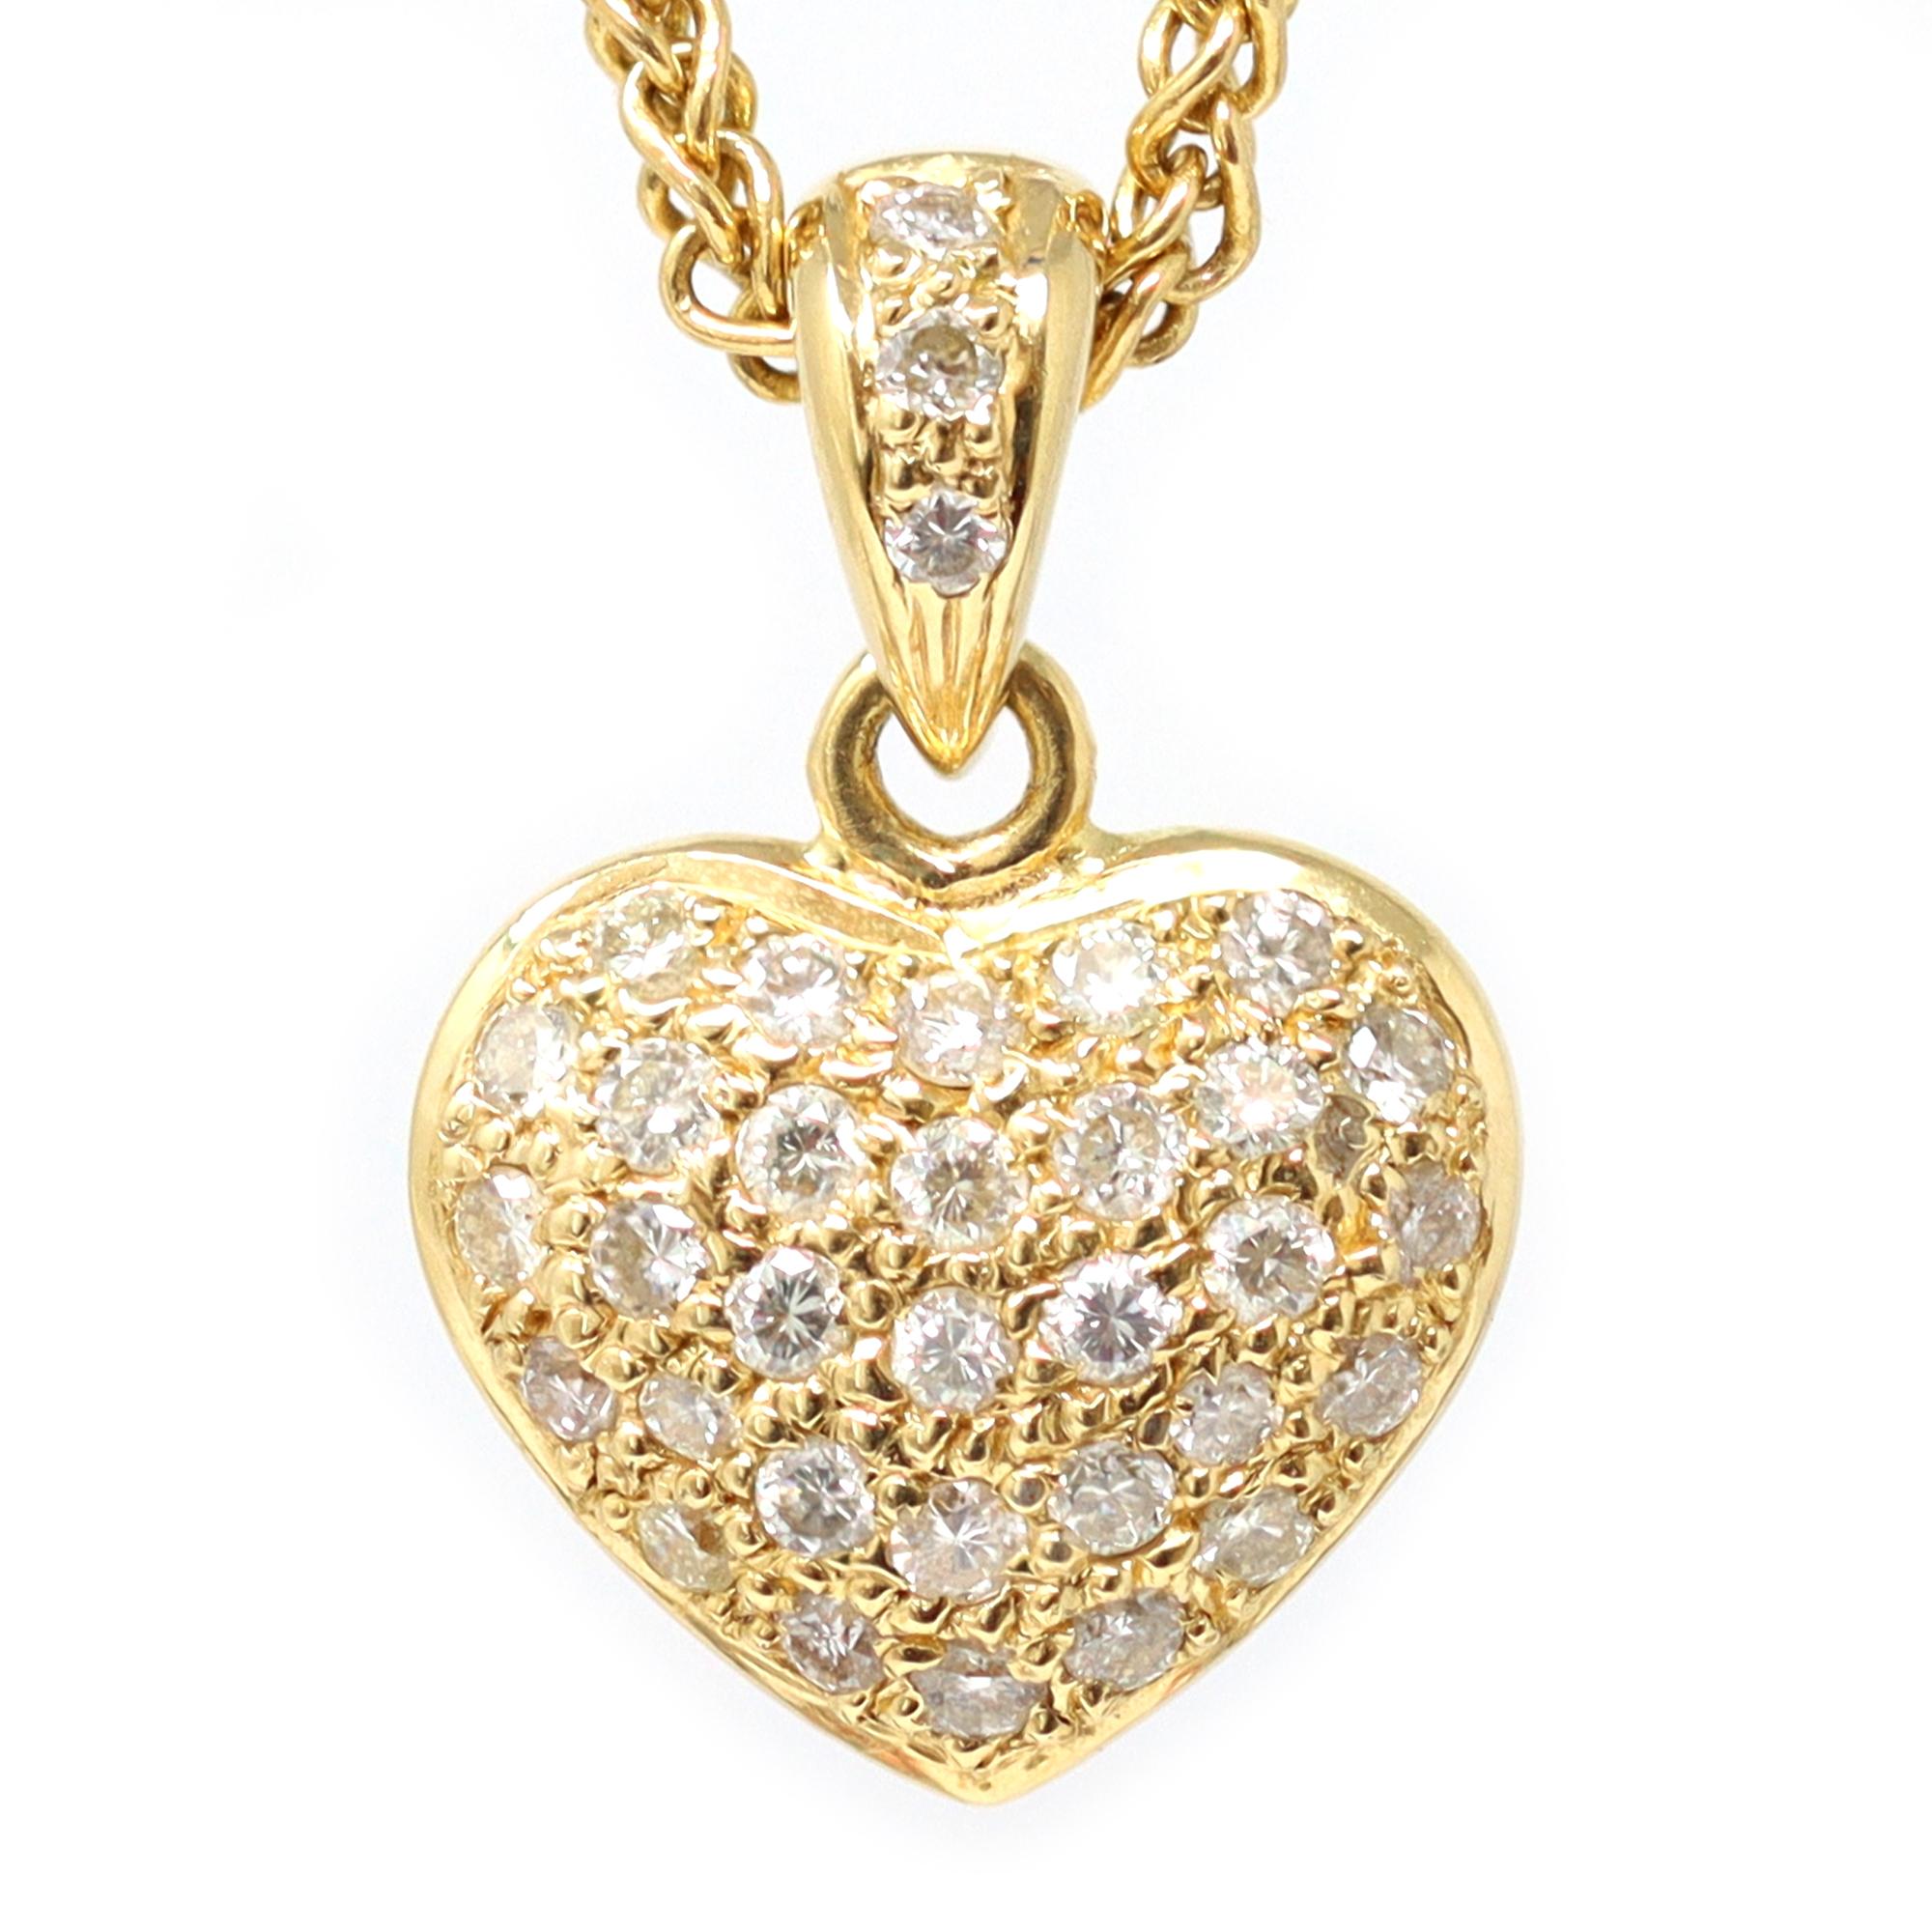 A very well-made classic Heart necklace featuring a pave diamond heart pendant on an intricate multi-link chain.
The diamond weight of 0.46 carats is stamped on the pendant - the diamonds are round in shape with a grade of GH color and VS clarity.